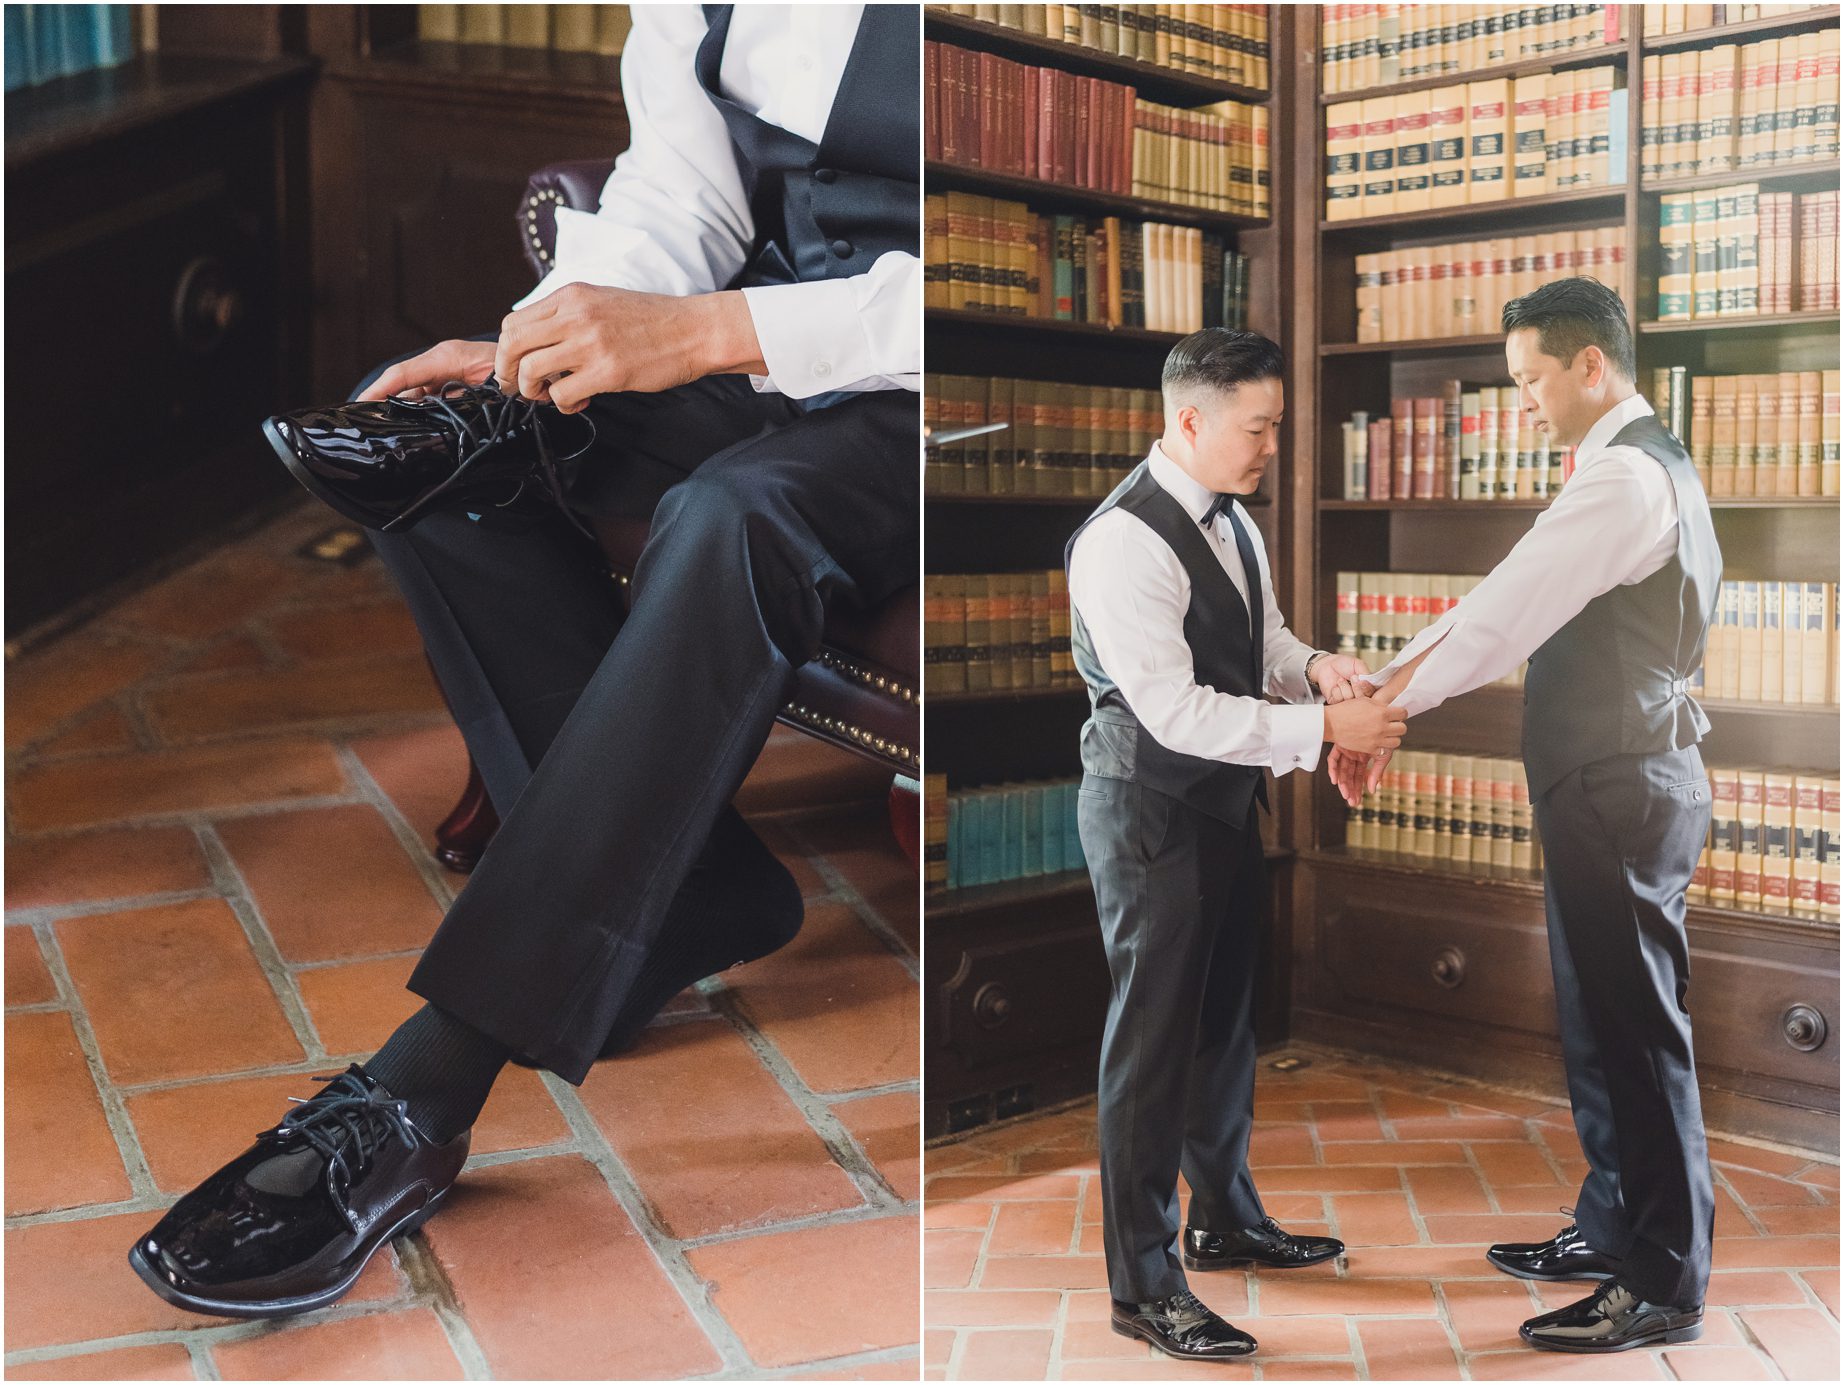 A groom and a groomsmen get ready for the wedding in the library in at villa del sol d'Oro. The groom puts on his shoes and his groomsman helps him put on his cufflinks